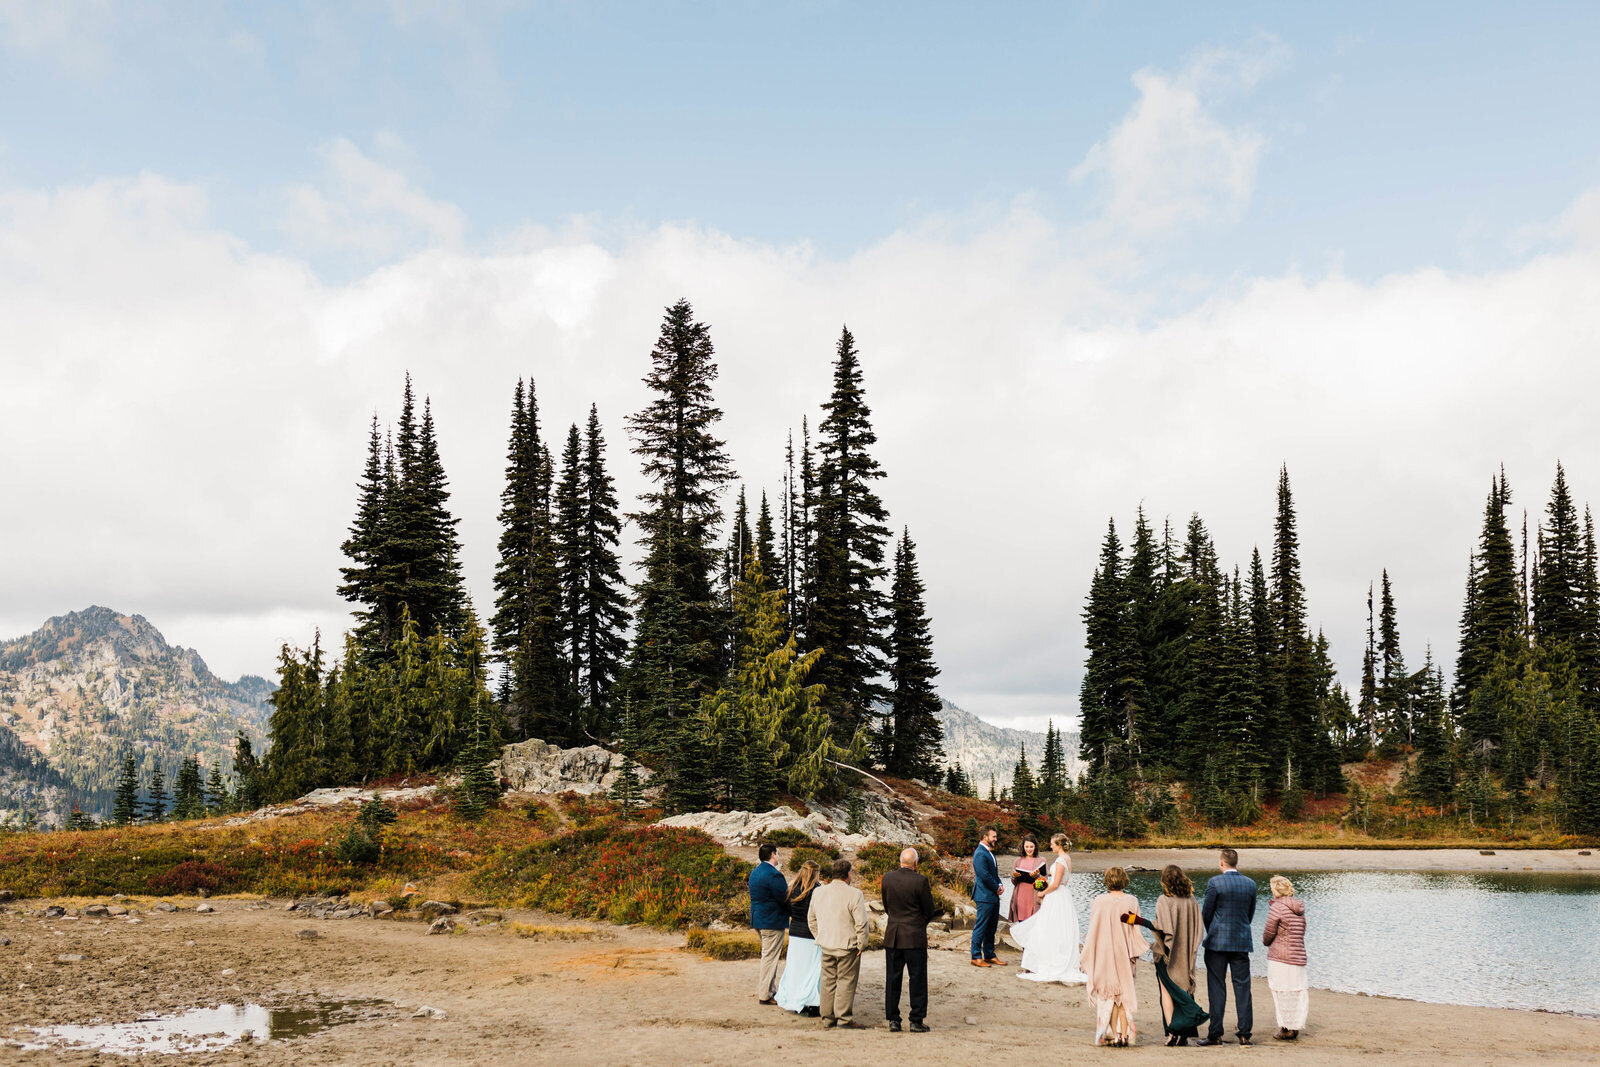 A couple says their vows at a small backcountry lake along the Pacific Crest Trail near Mt Rainier National Park